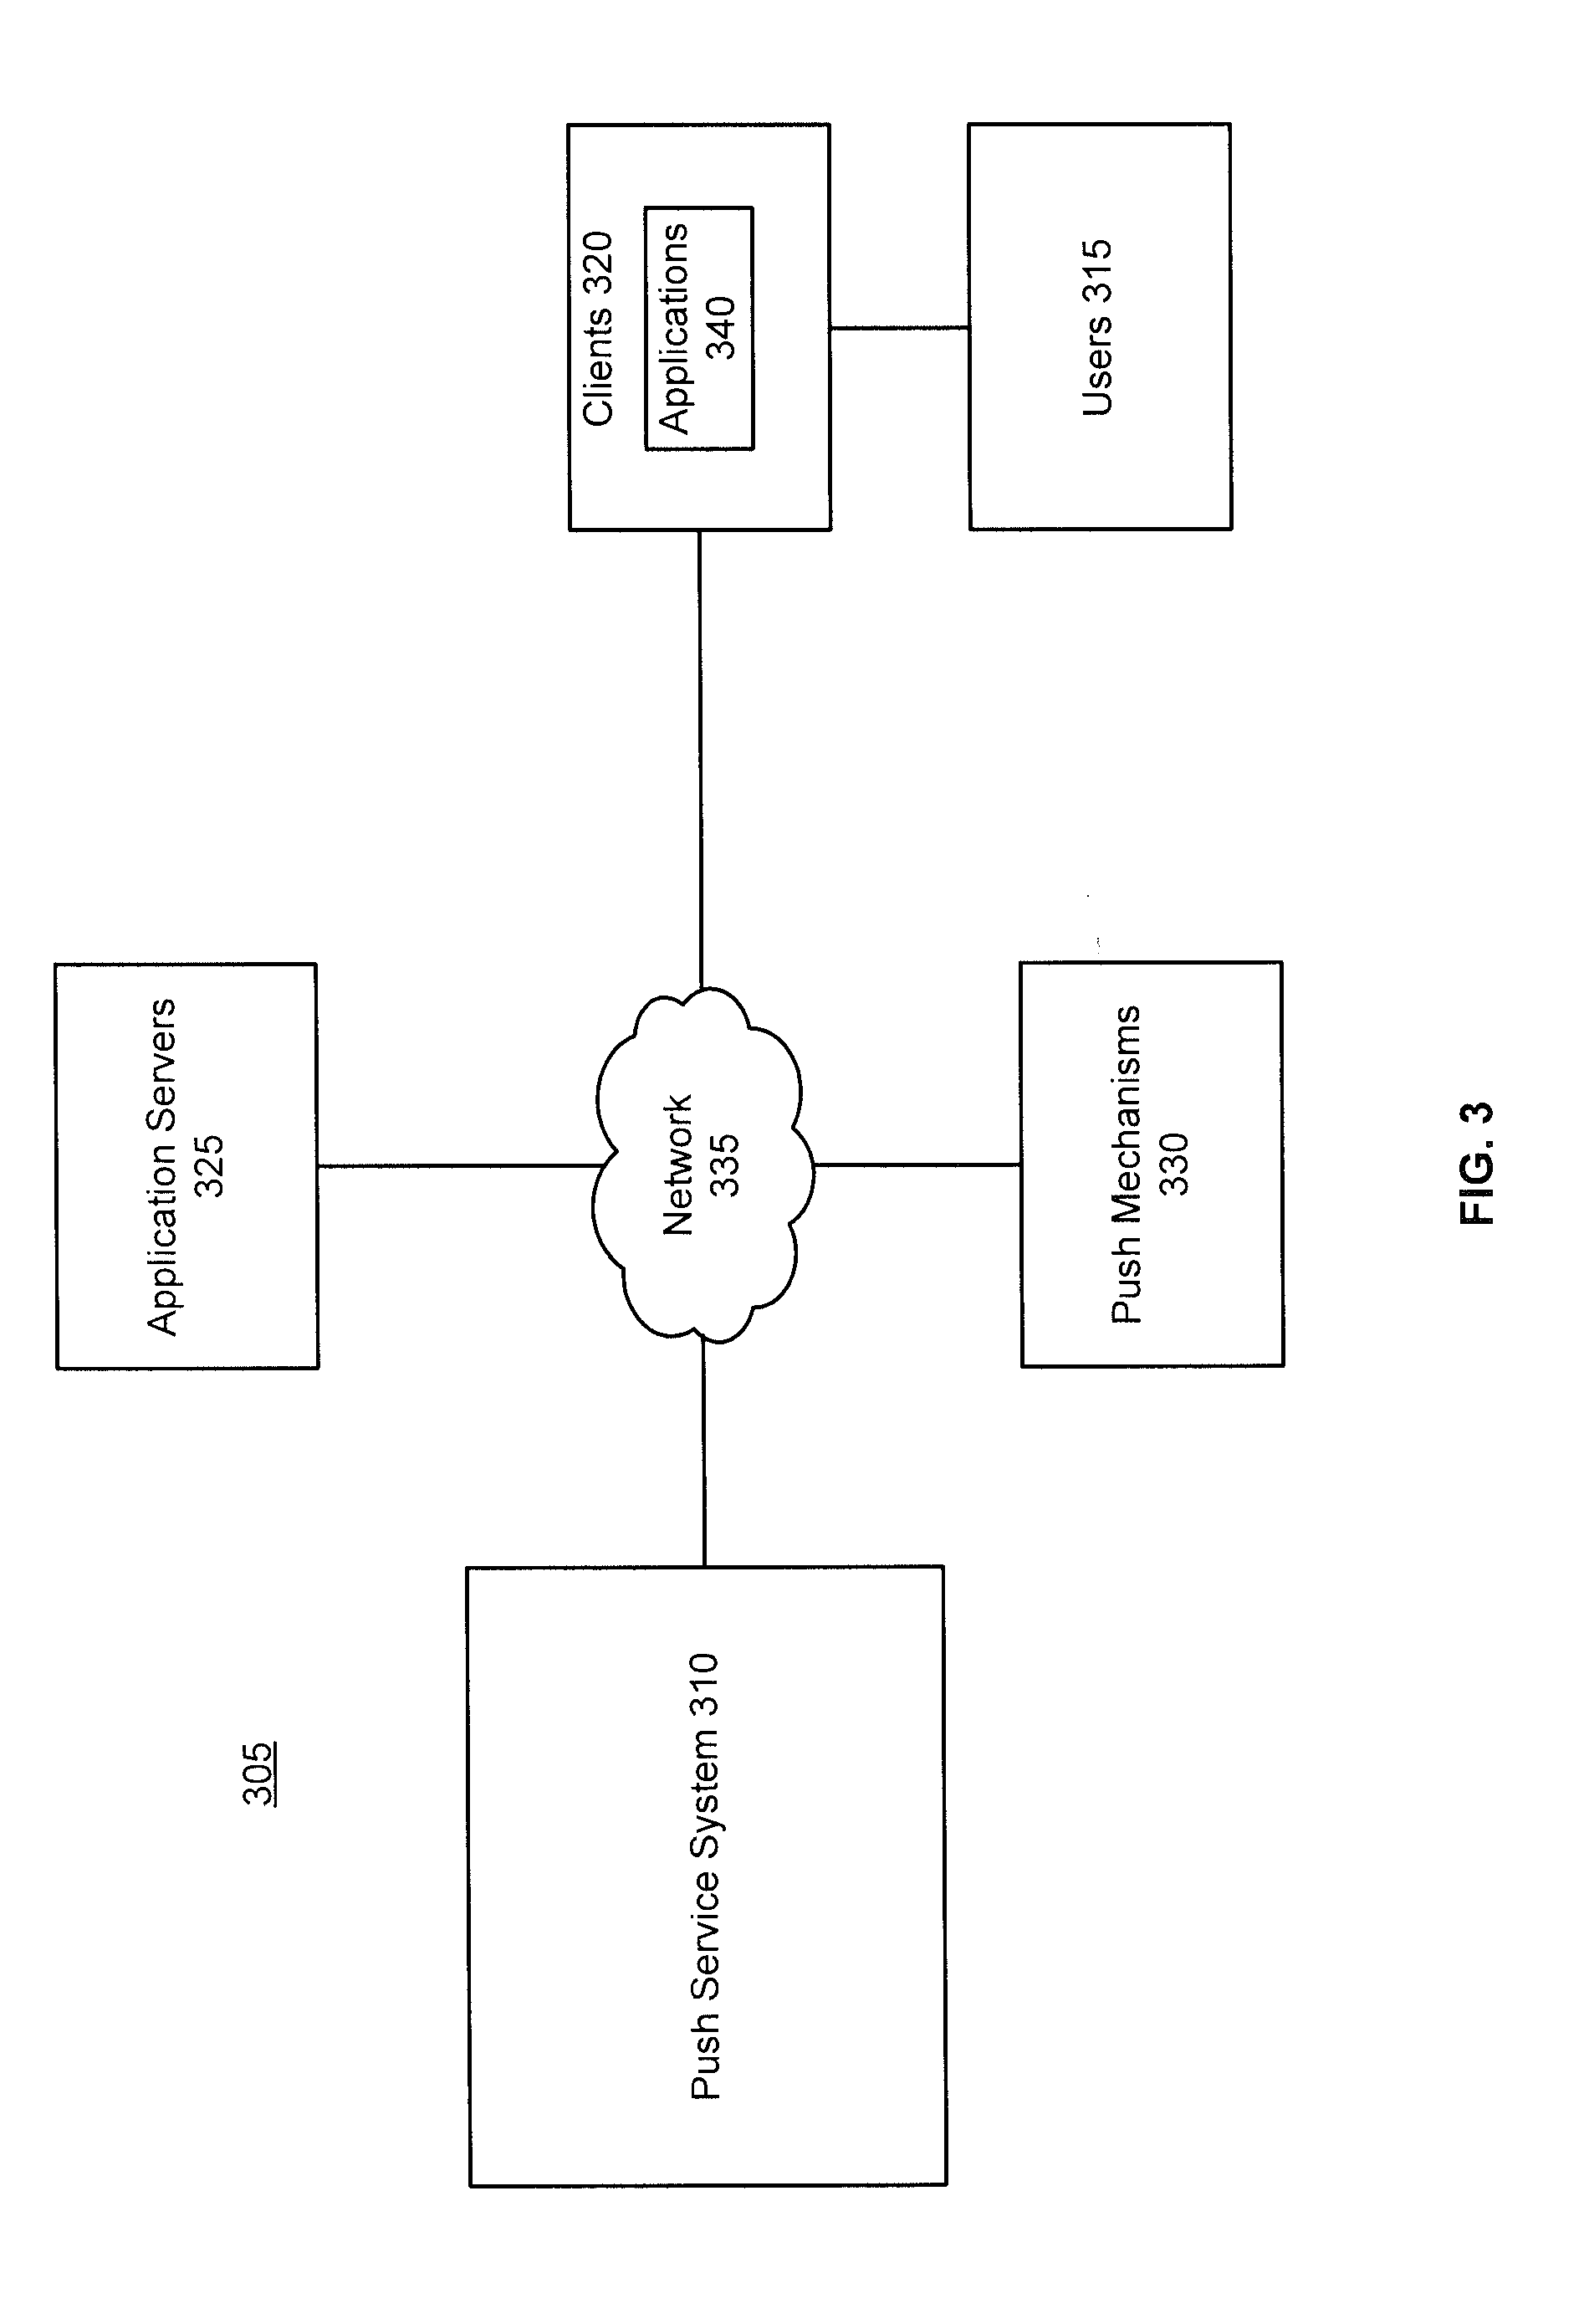 System and method for mobile device push communications